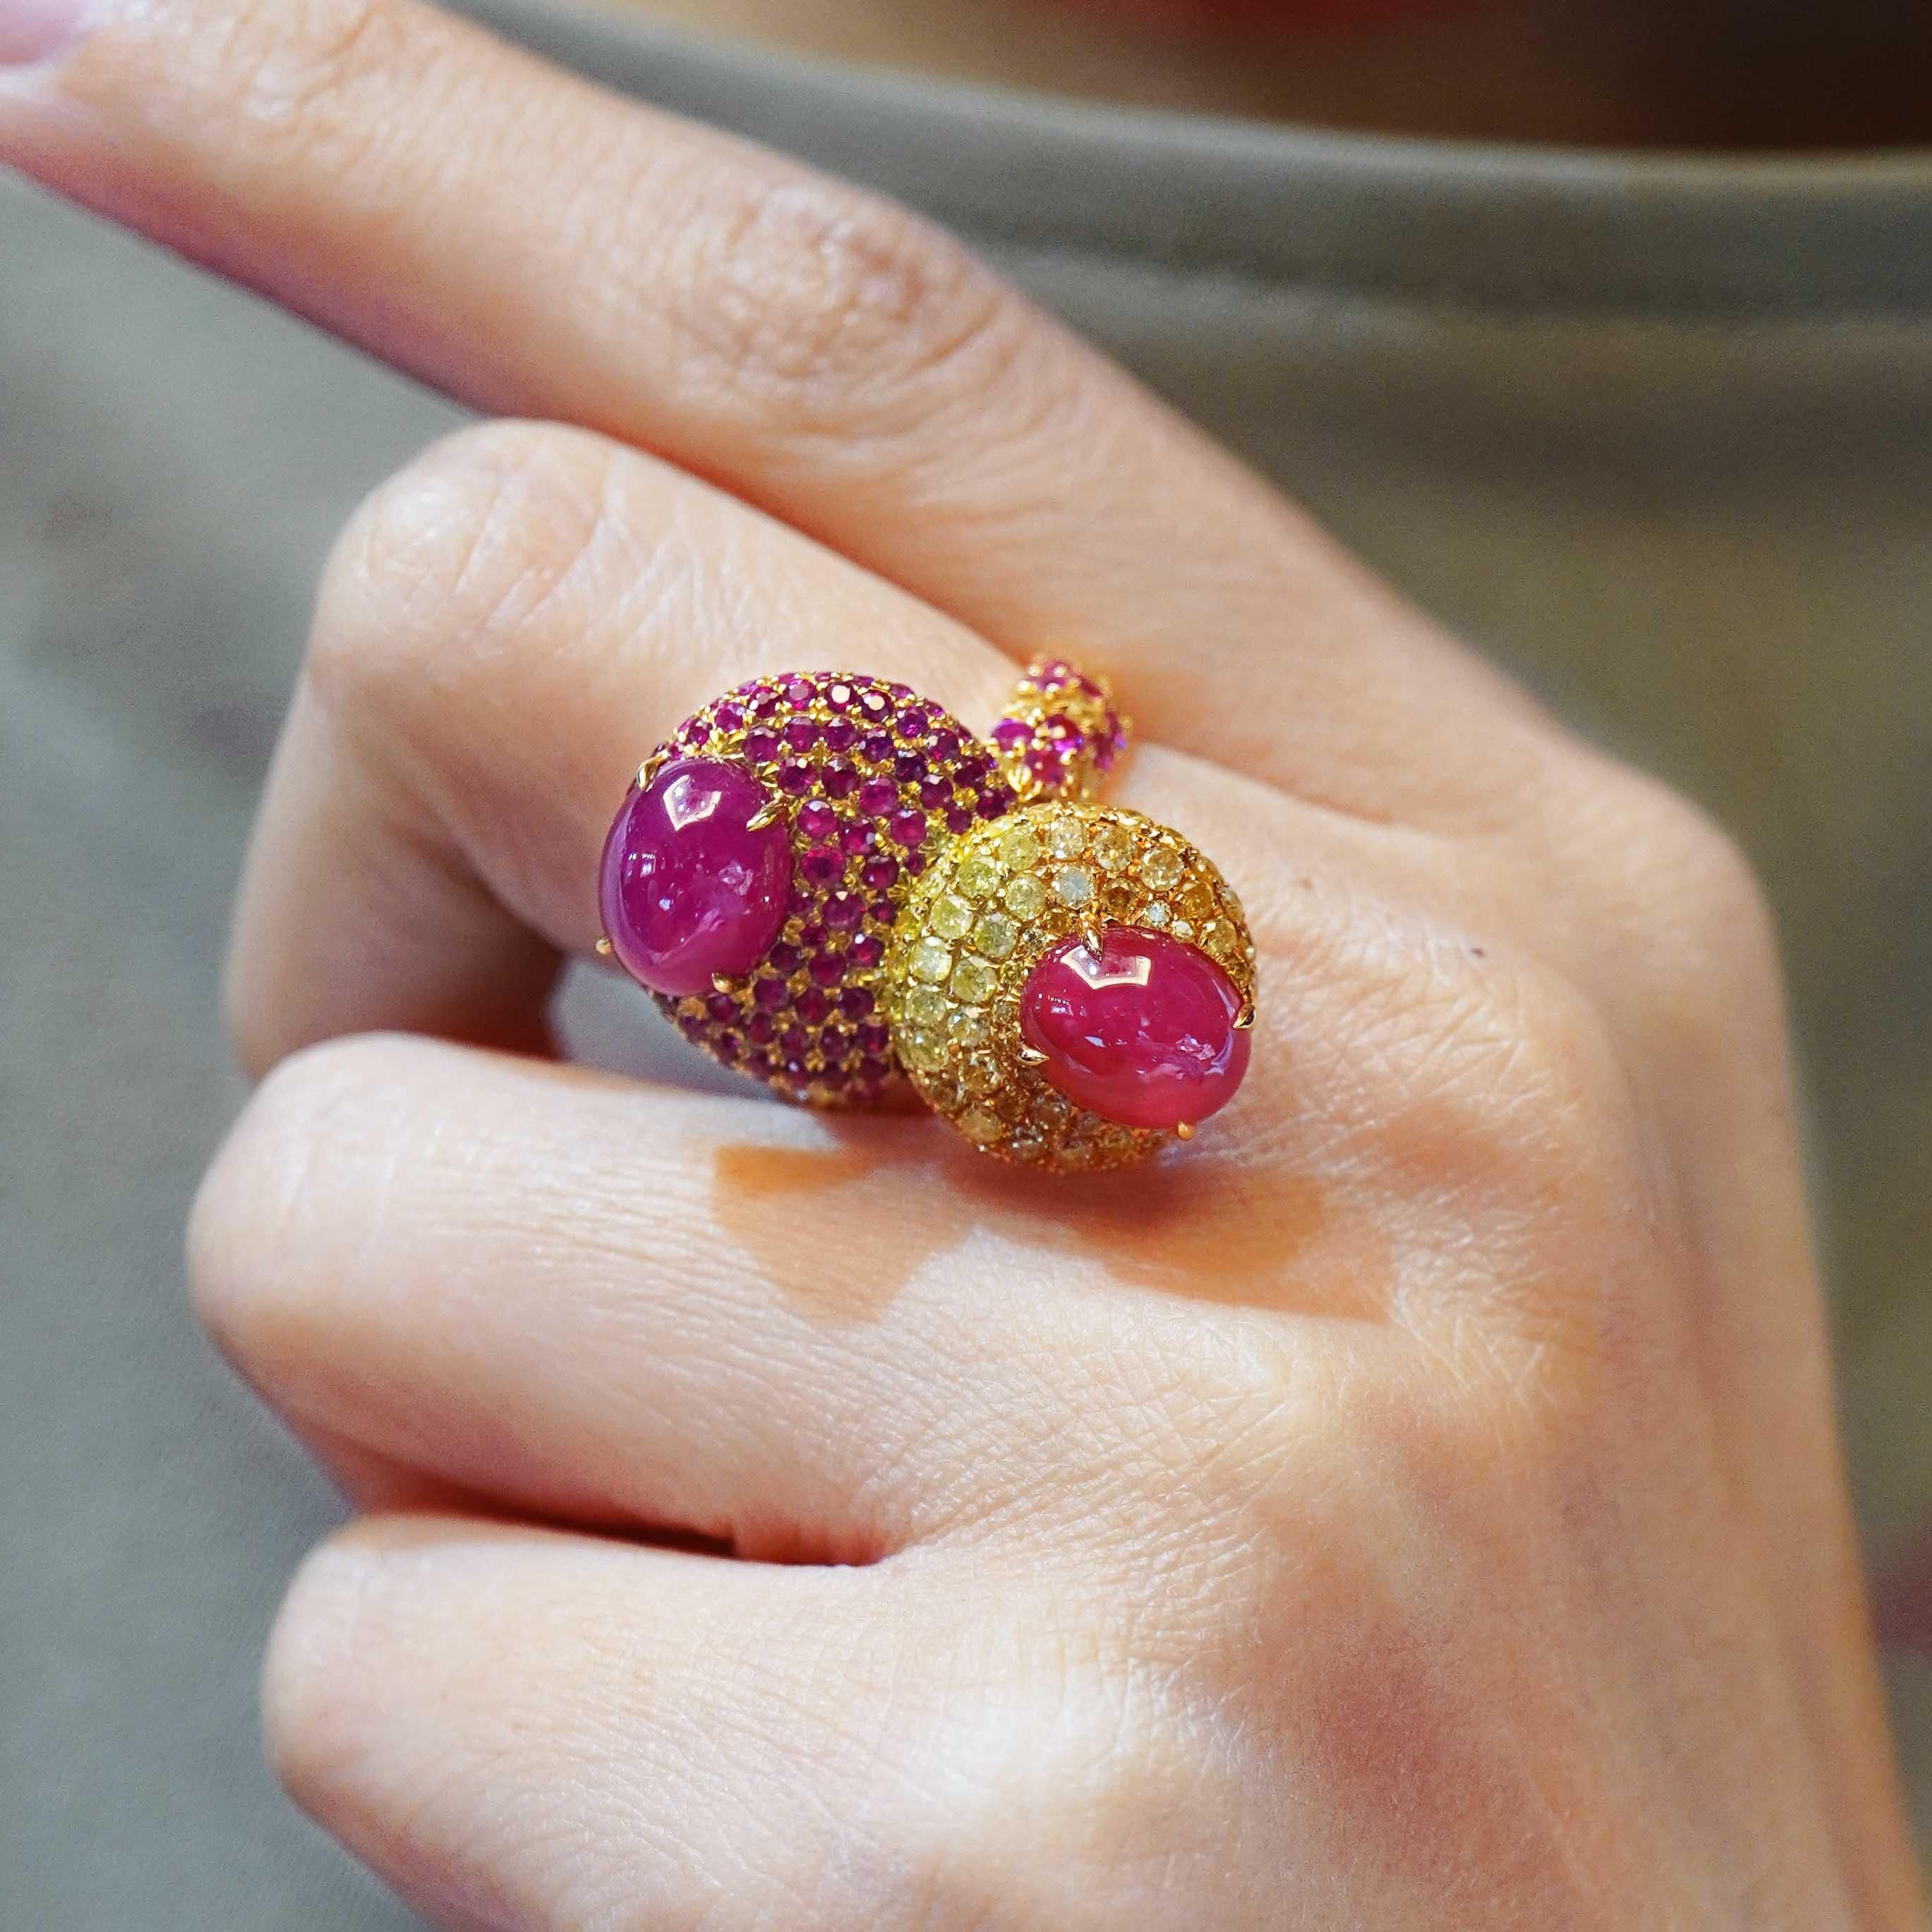 A beautiful combination of 6.78 carats of vivid red ruby and 1.40 carat of vivid yellow round brilliant diamond are accented with 1.22 carat of white round brilliant diamond. The details of the ring are mentioned below:
Color: F
Clarity: Vs
Ring